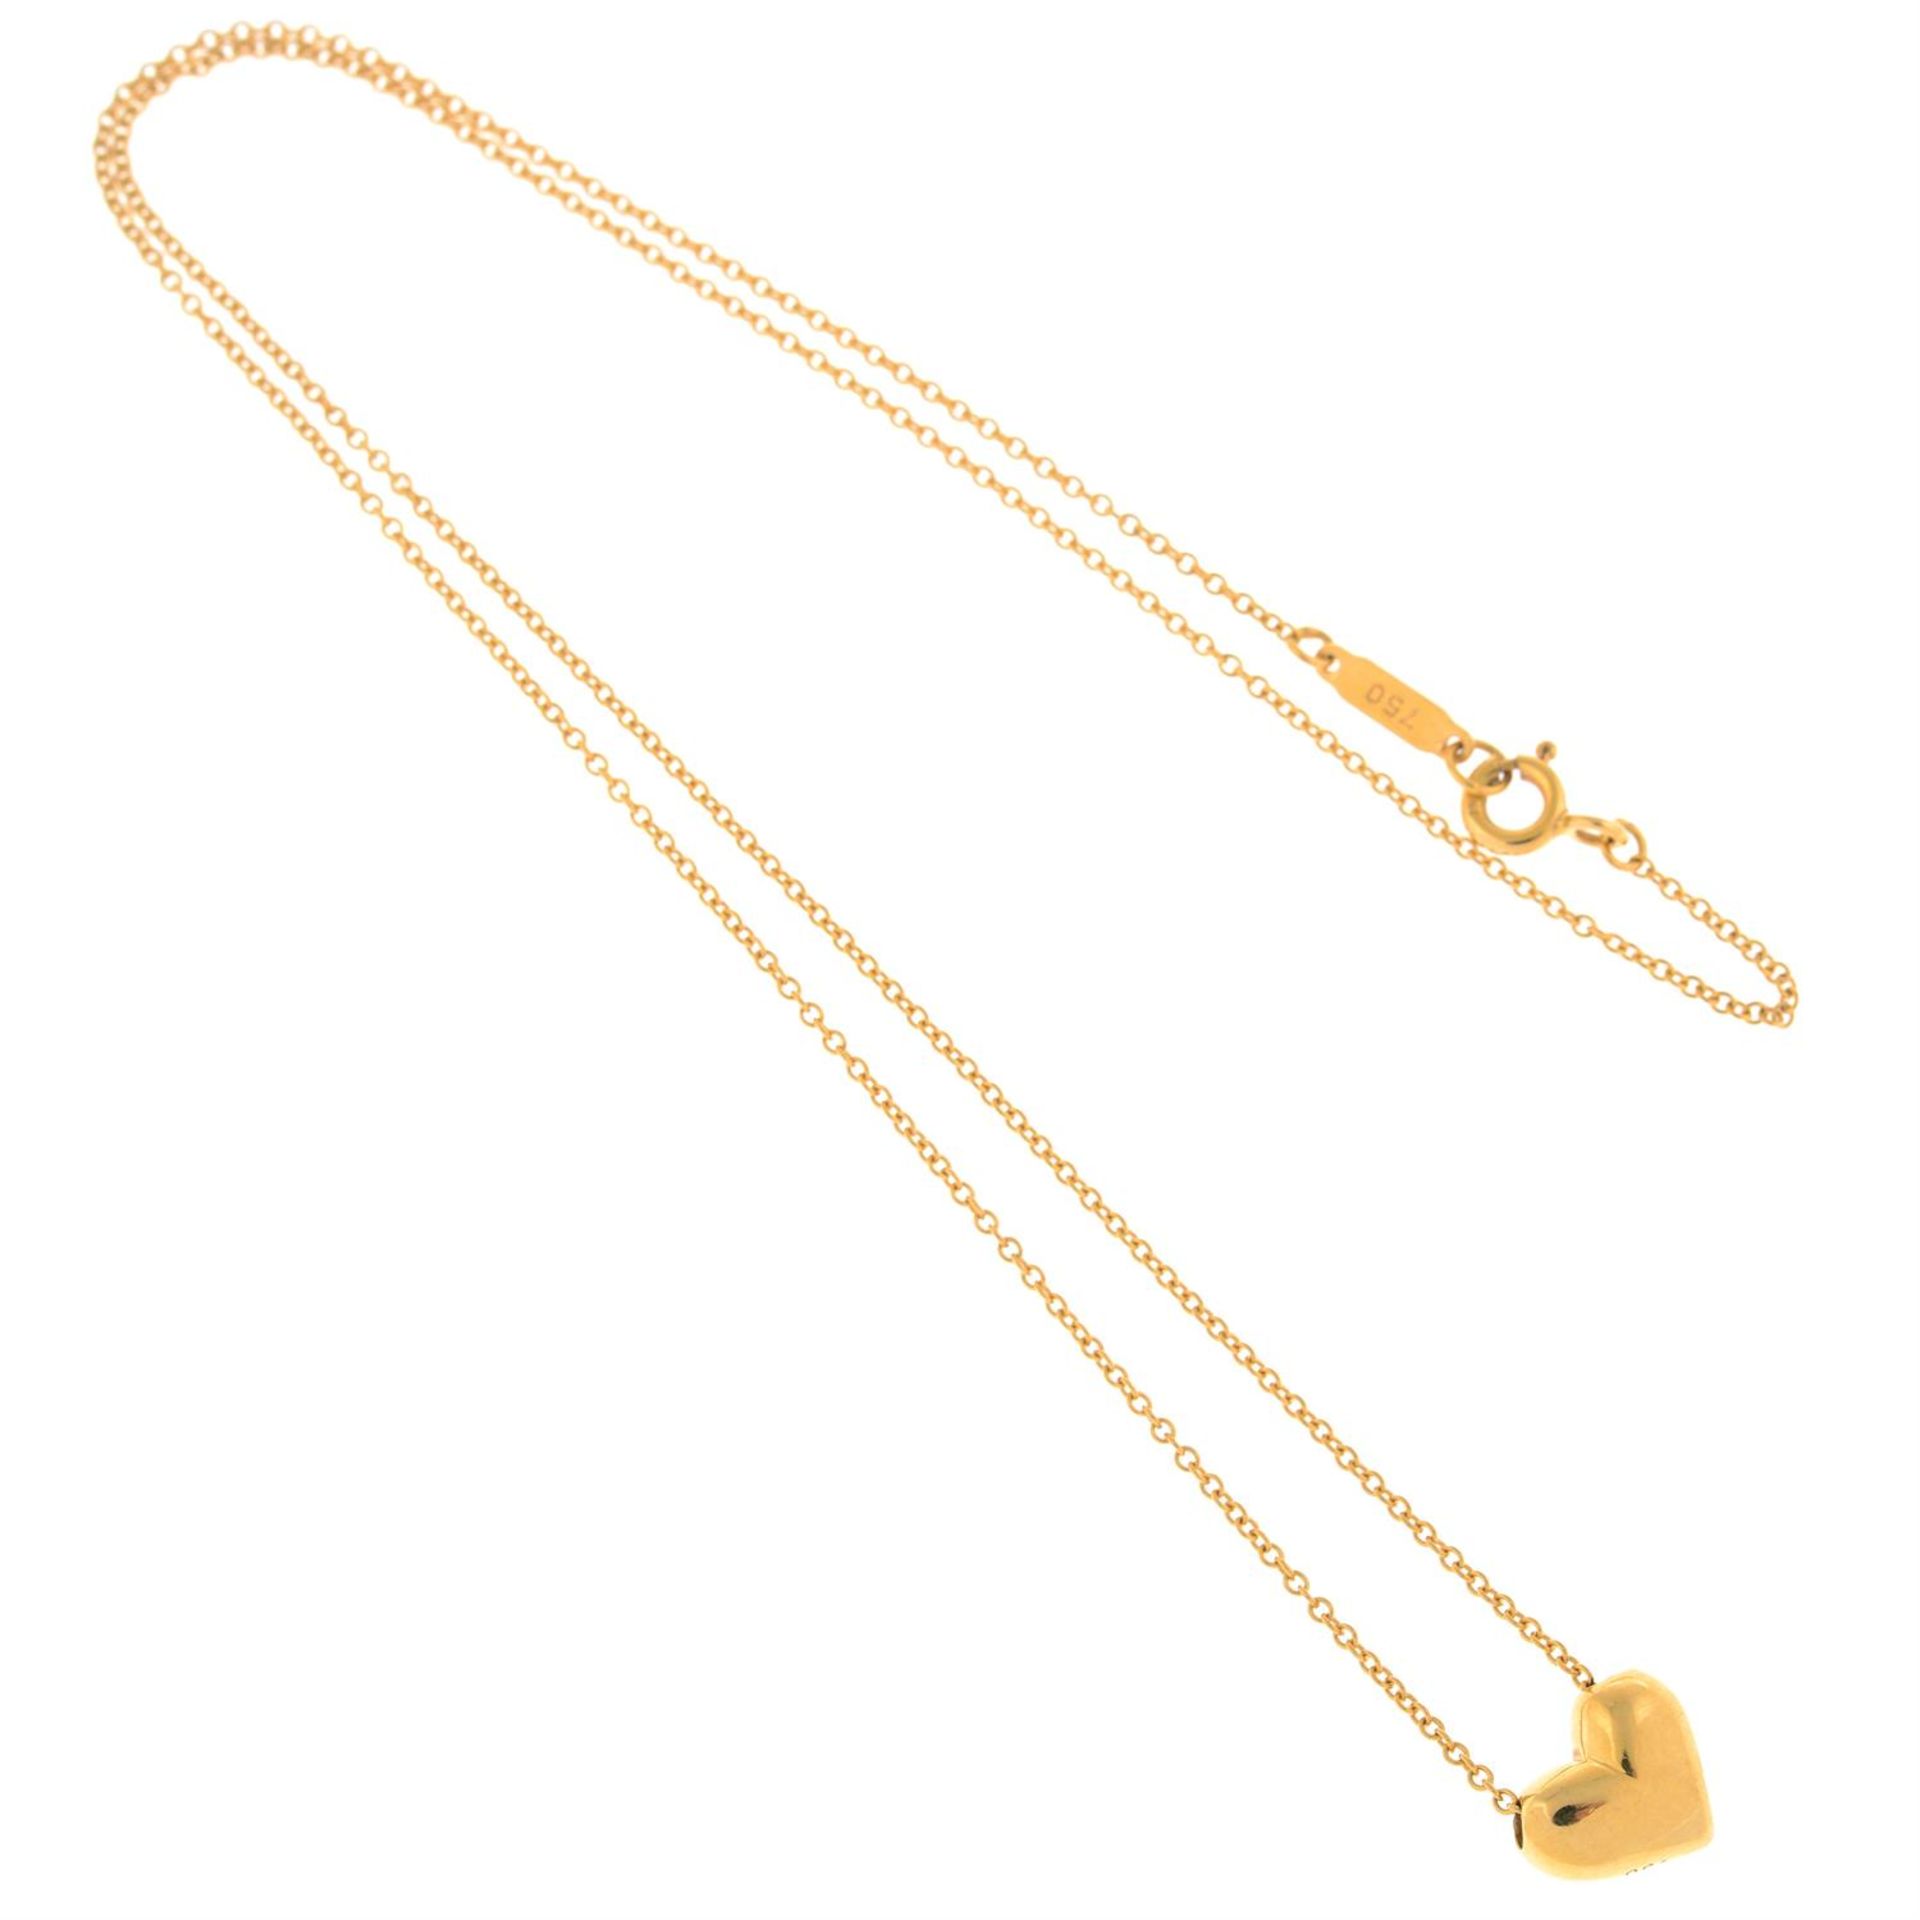 A heart pendant, with chain, by Tiffany & Co. - Image 2 of 4